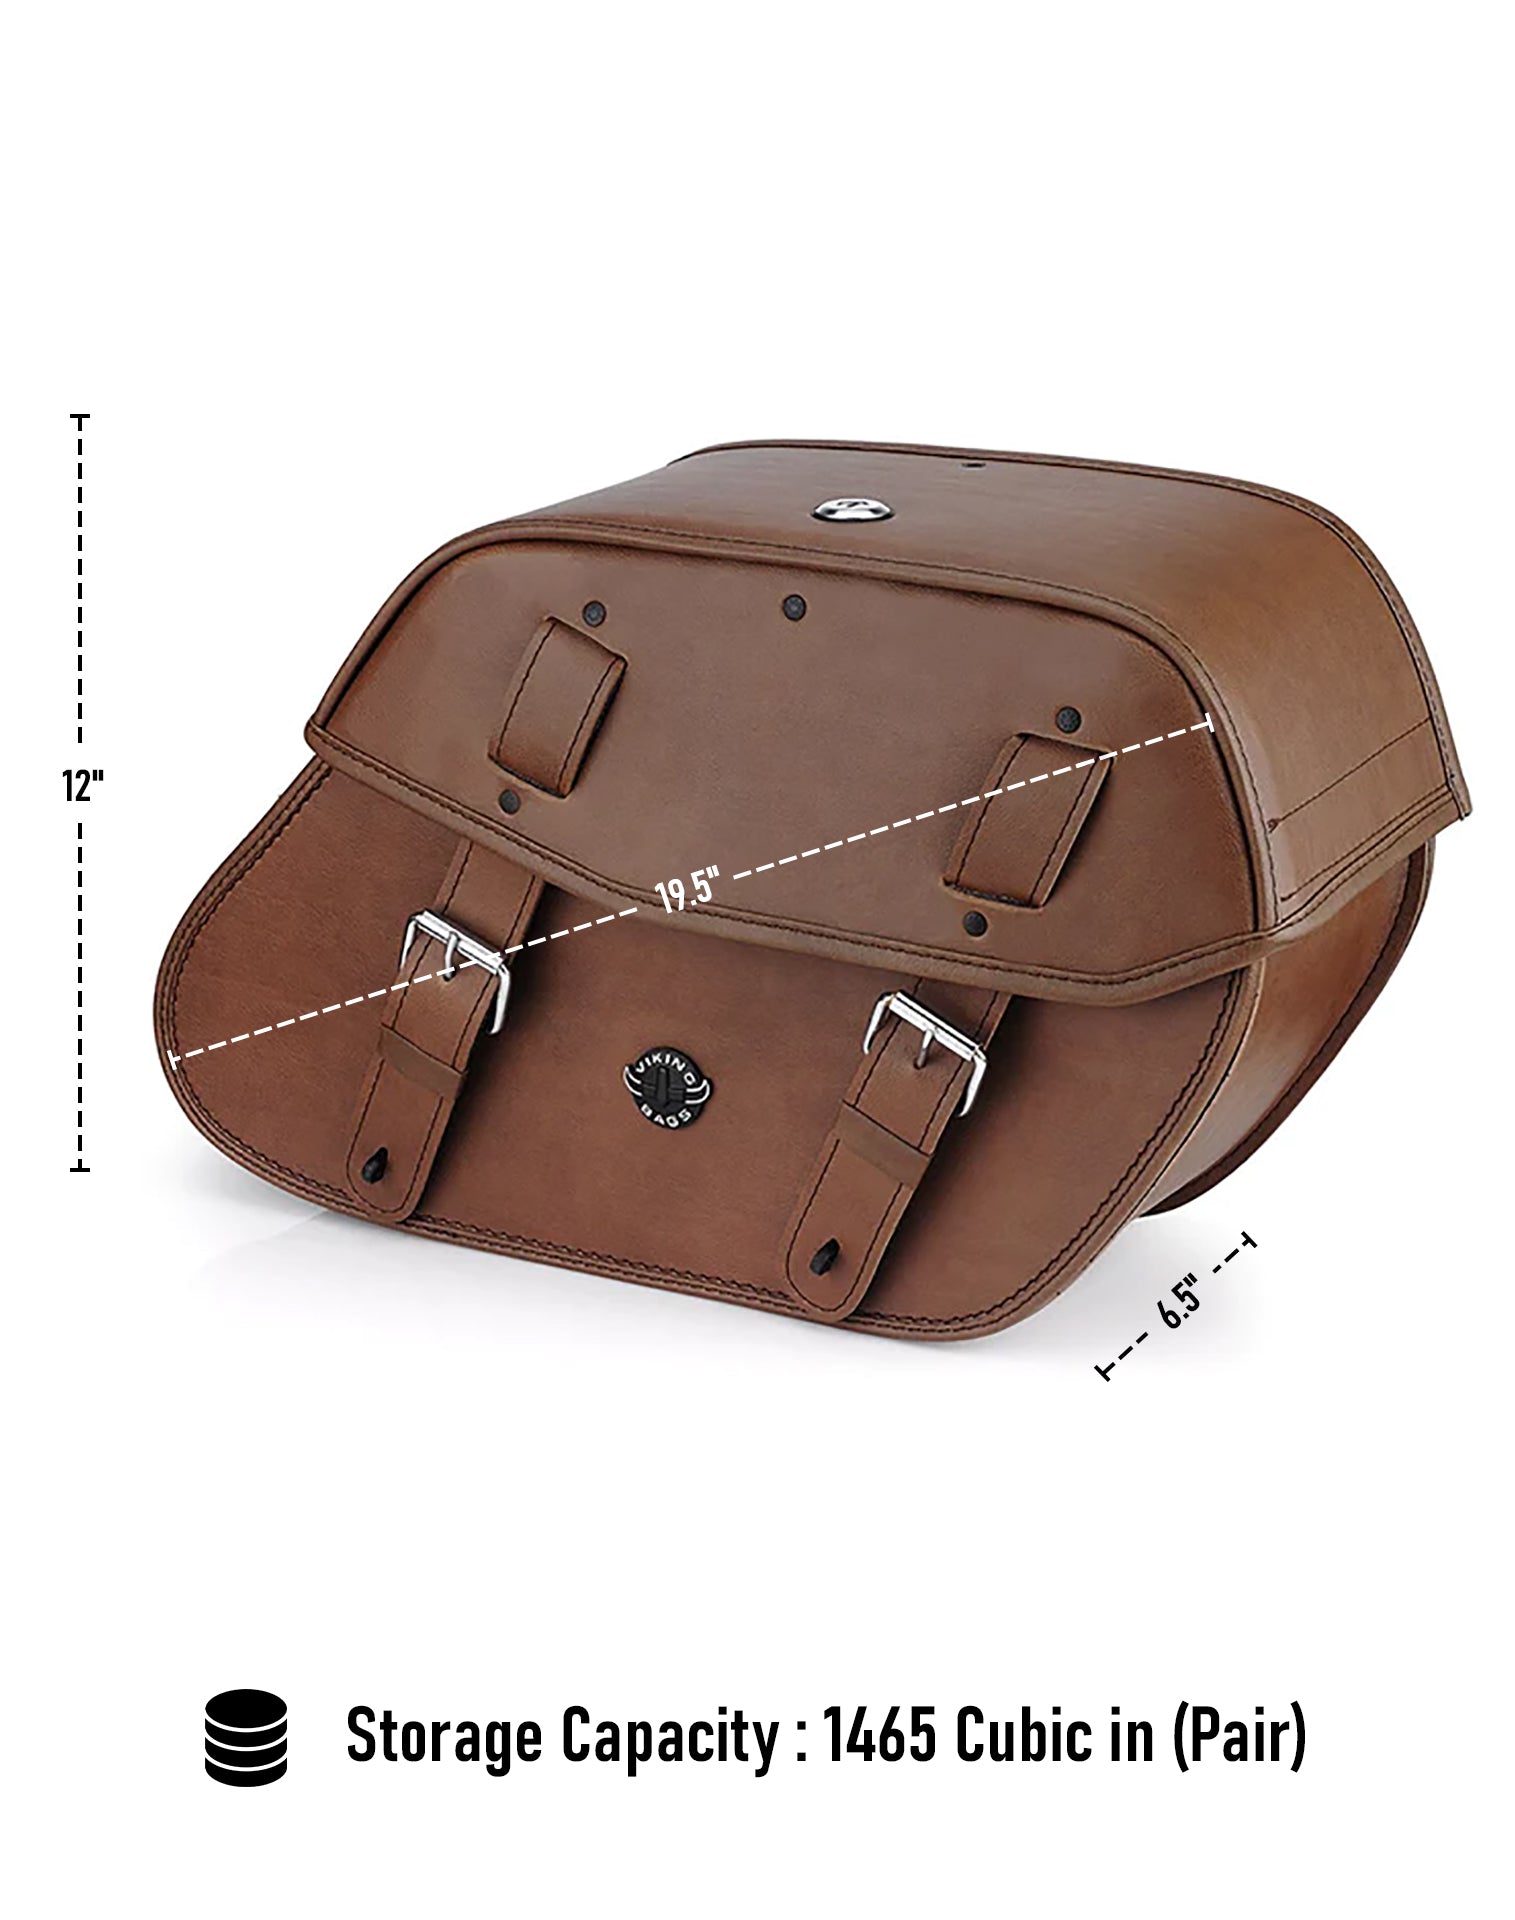 Viking Odin Brown Large Suzuki Boulevard M50 Vz800 Leather Motorcycle Saddlebags Can Store Your Ridings Gears